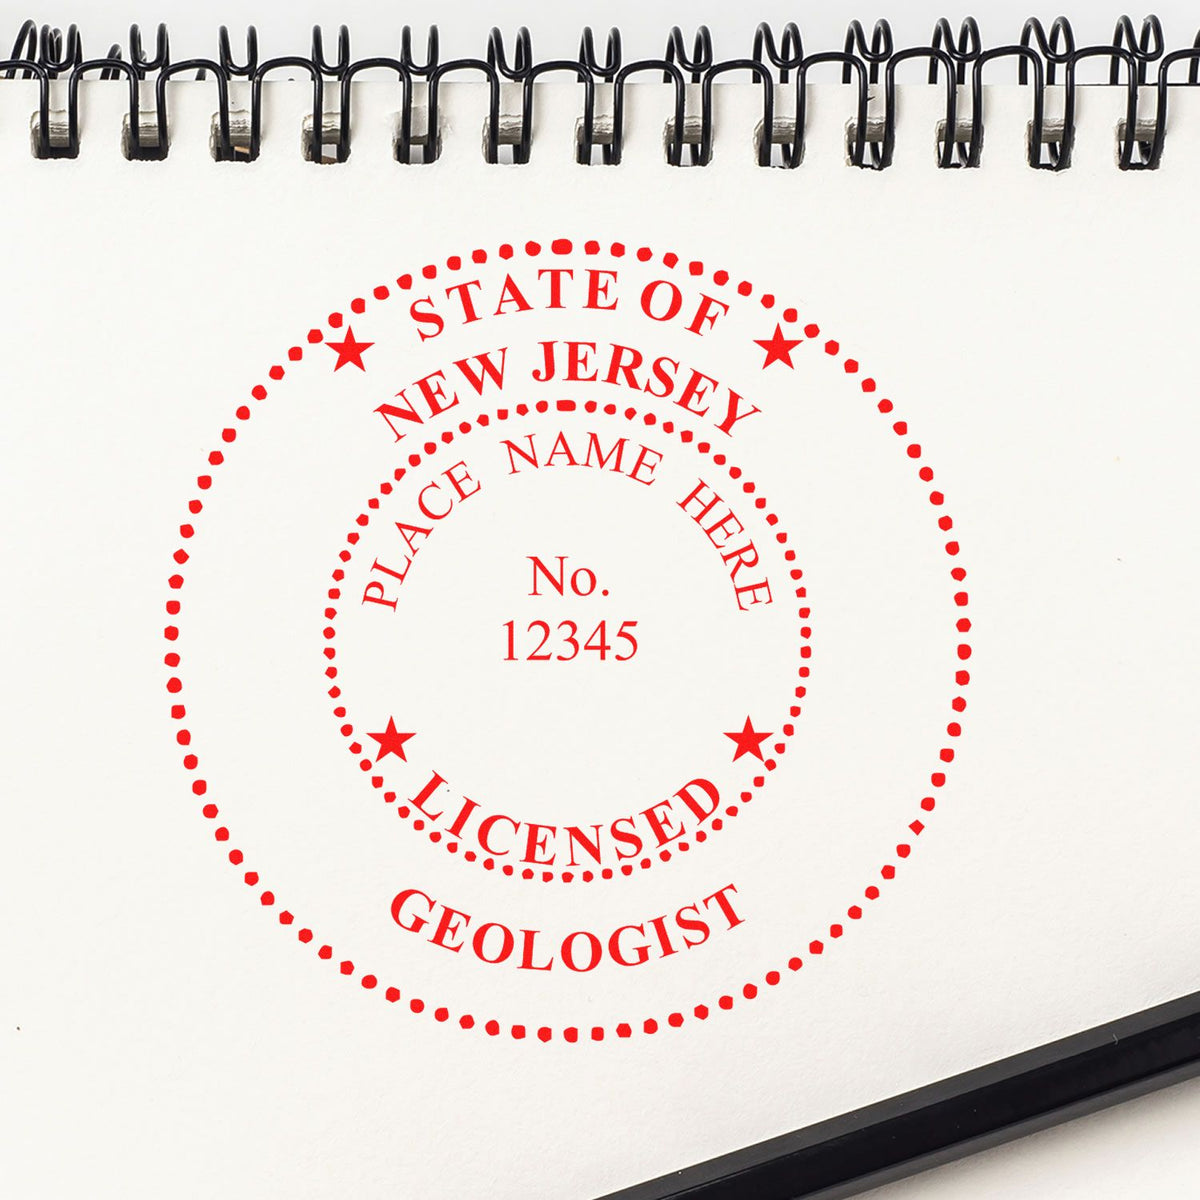 A photograph of the Self-Inking New Jersey Geologist Stamp stamp impression reveals a vivid, professional image of the on paper.